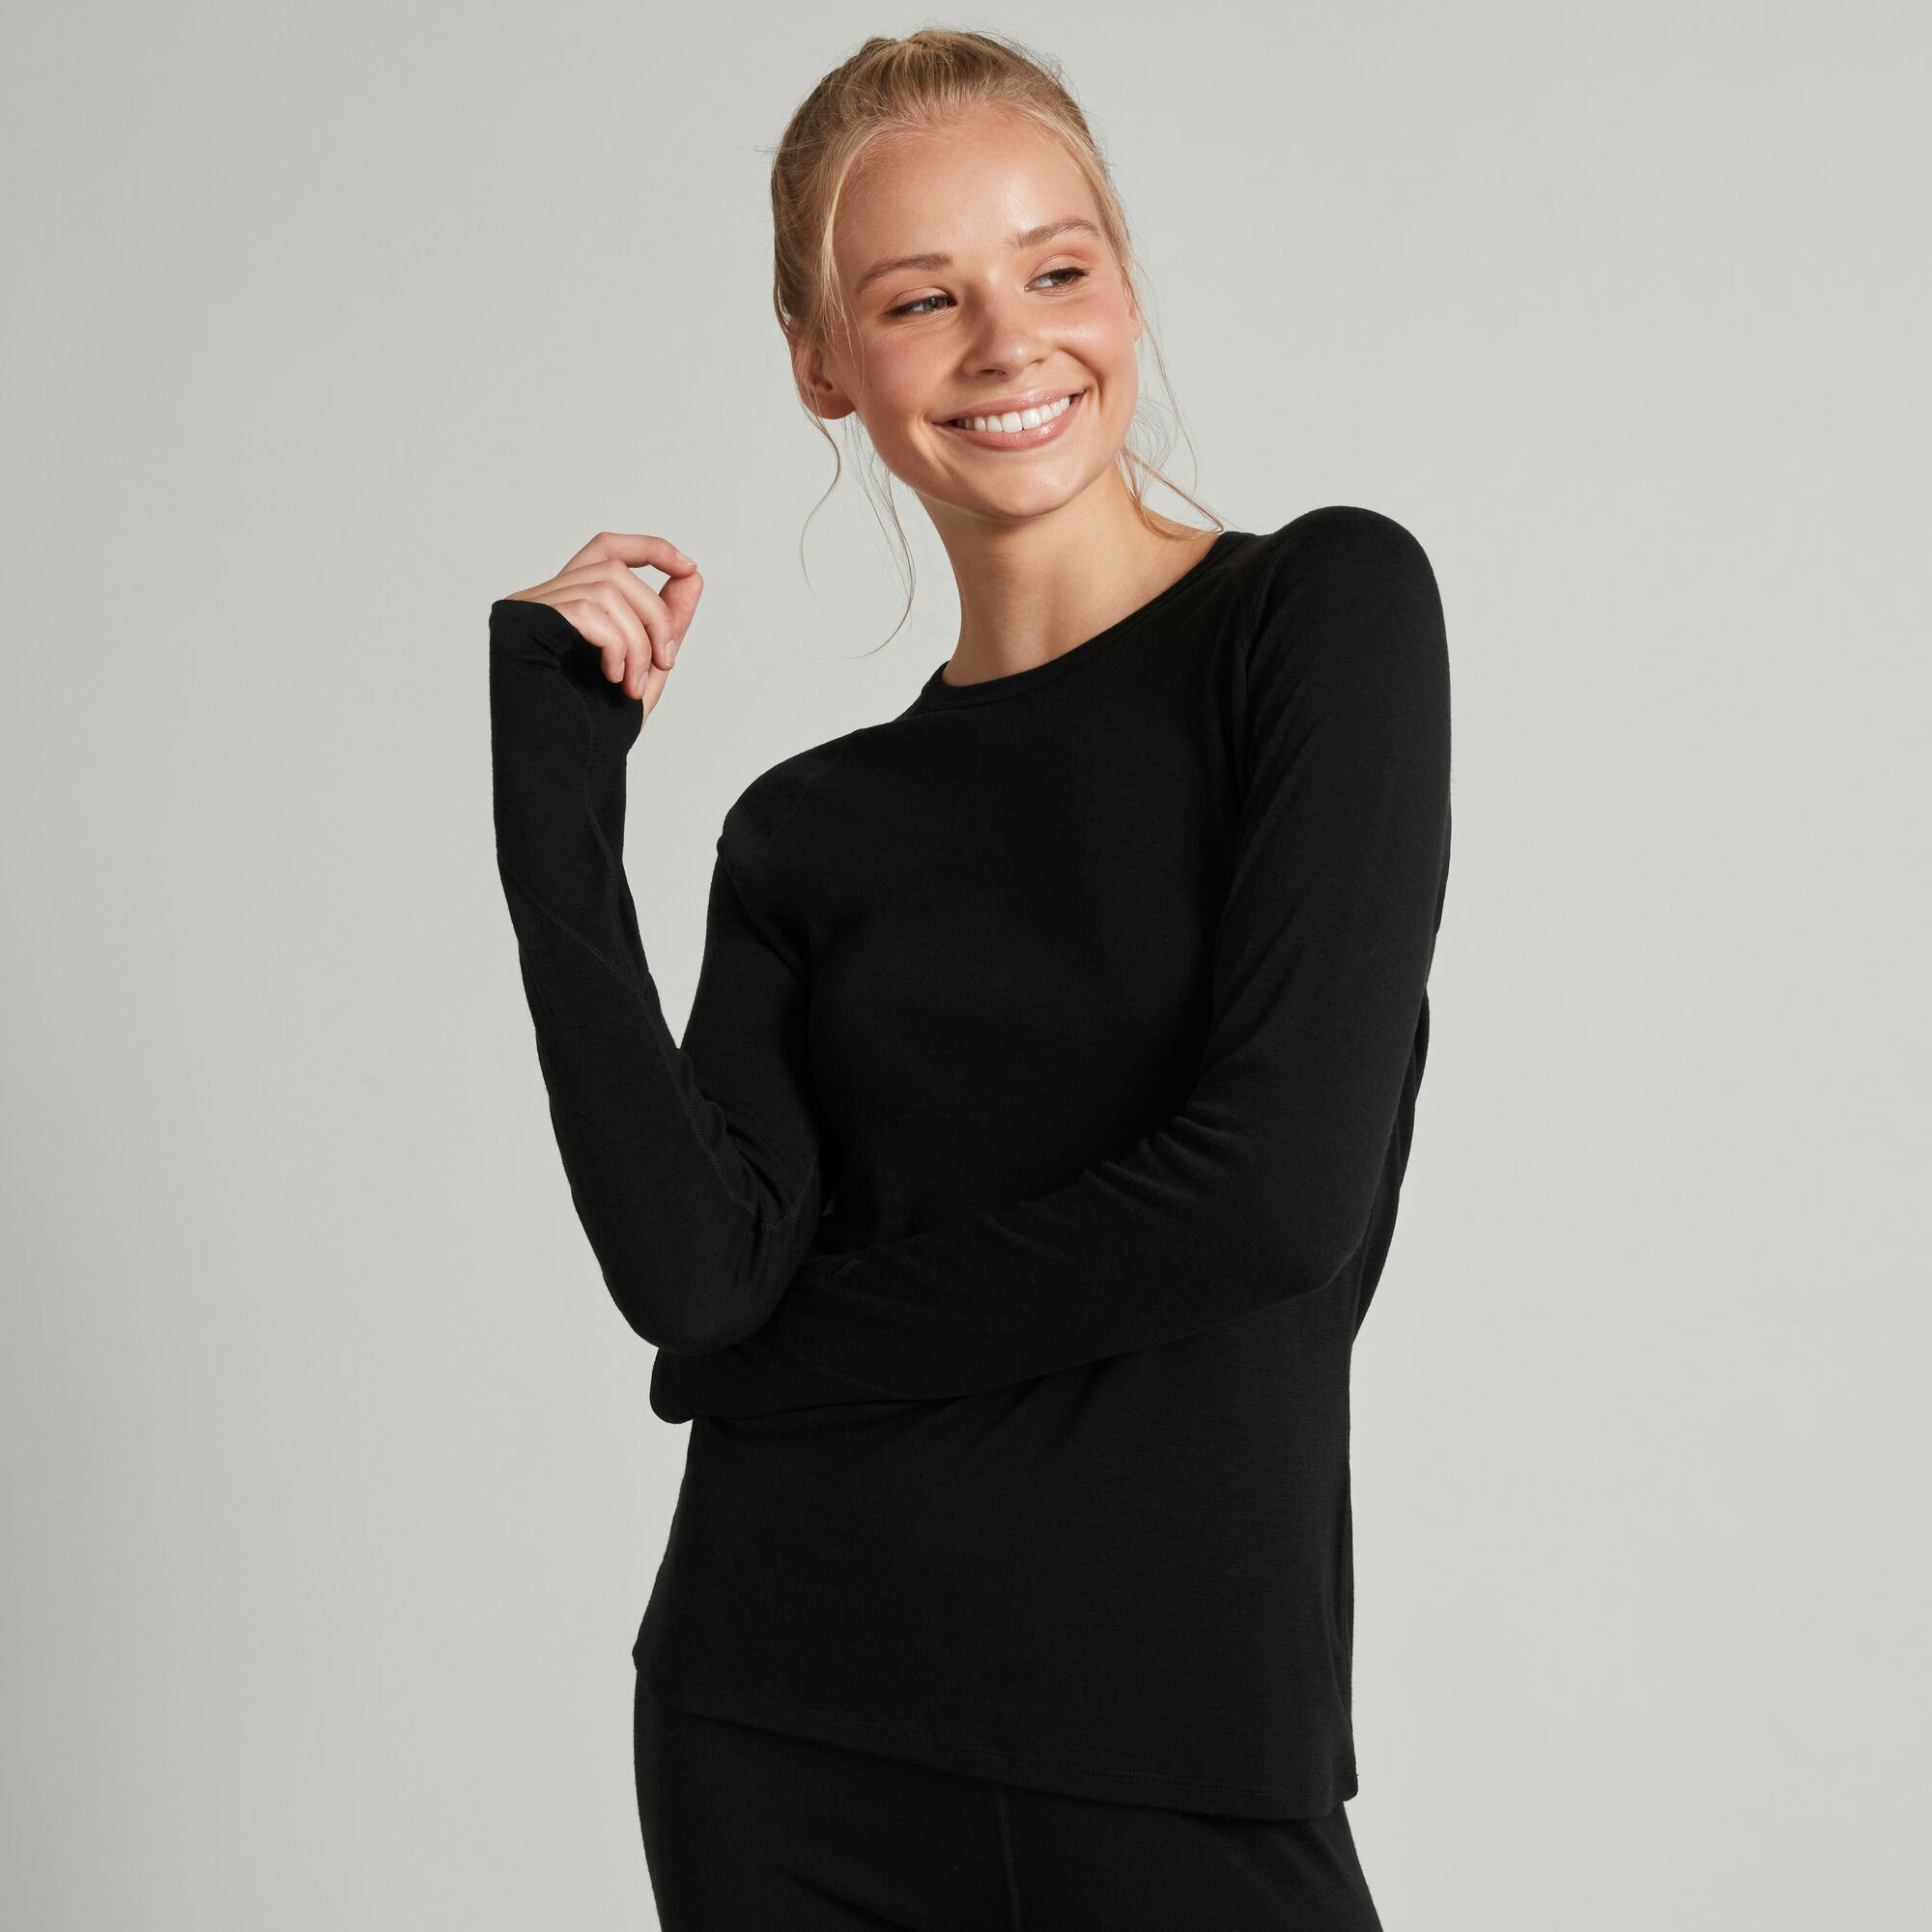 Kathmandu Mens & Womens ThermaPlus Thermals Tops & Pants $17.00 Each +  Delivery (or Free Pick up) - OzBargain